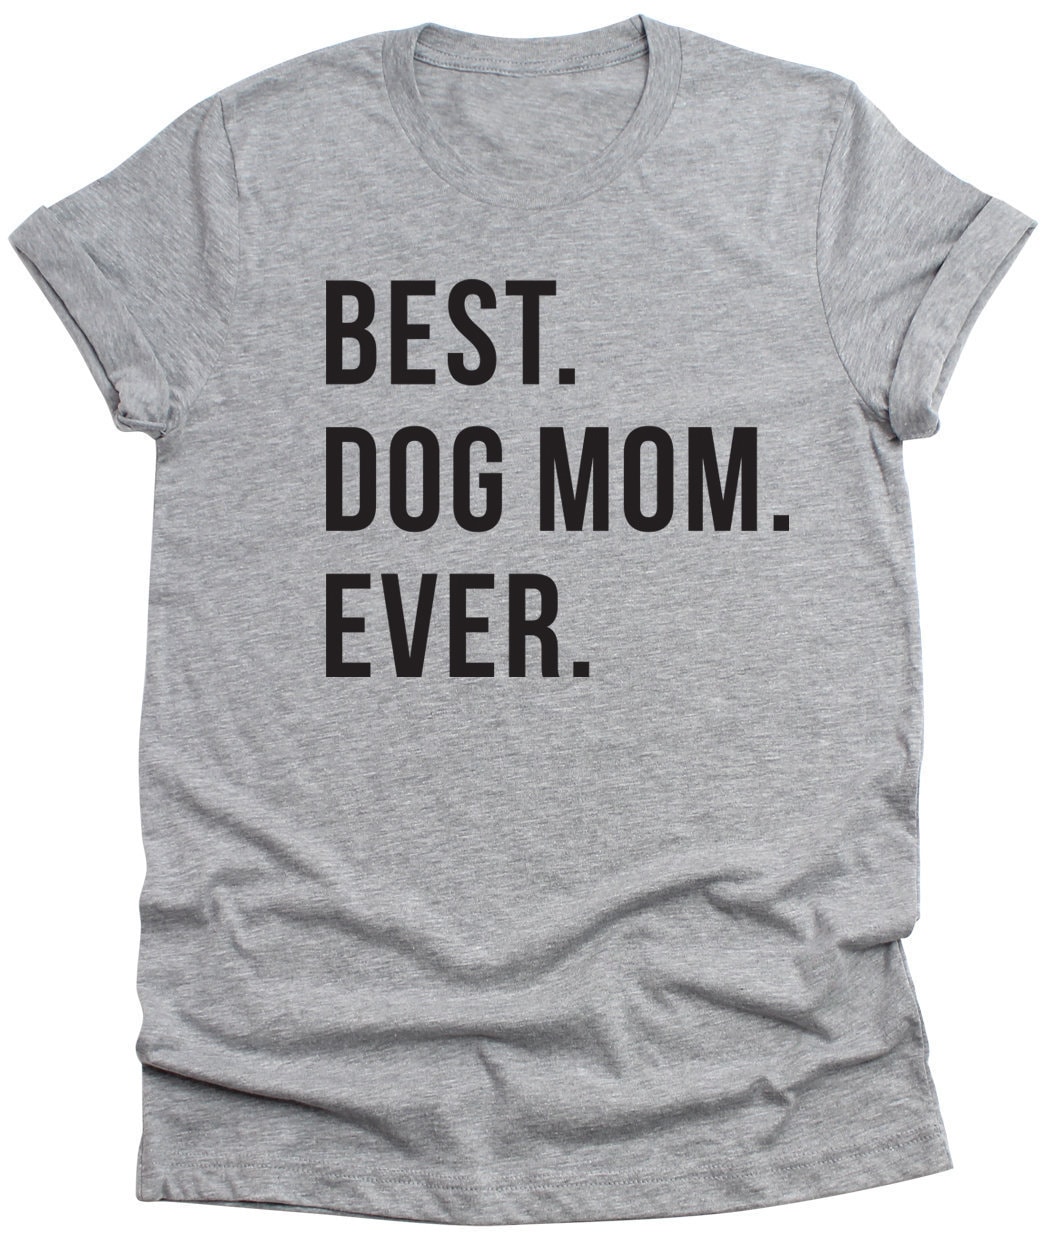 Best Dog Mom Ever T-Shirt Funny Unisex tee Wife Gifts | Etsy